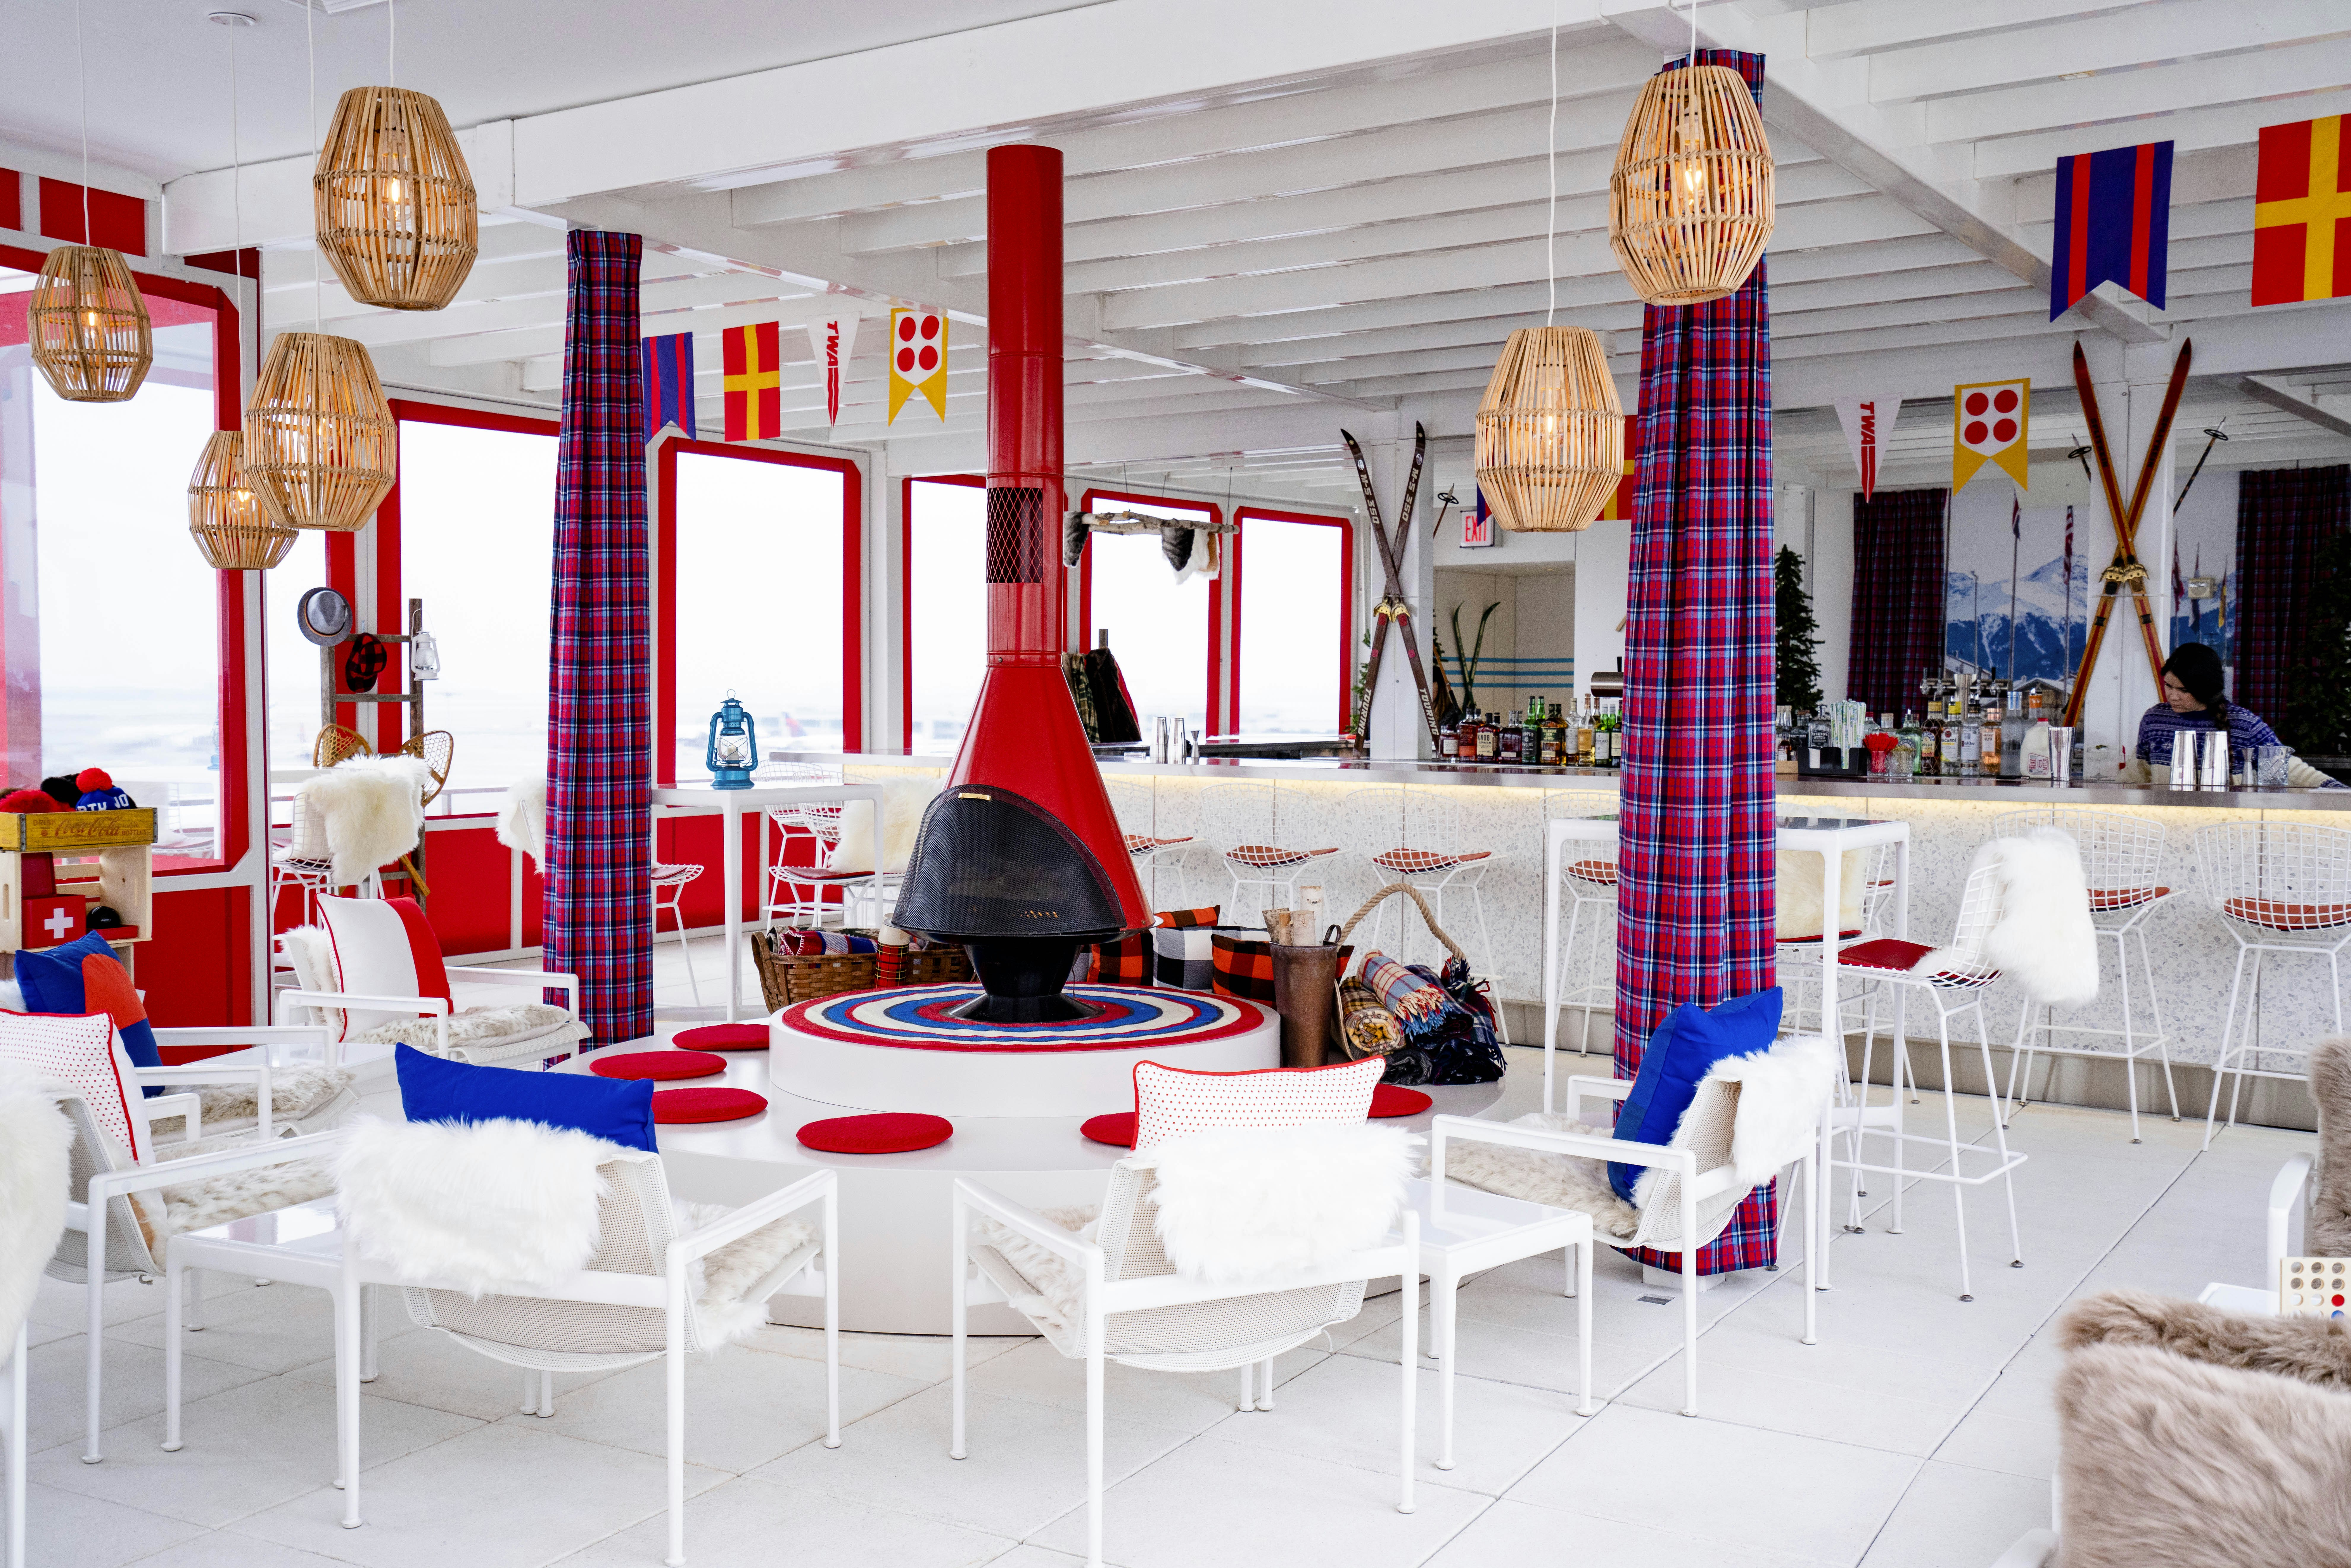 TWA Hotel Runway Chalet at The Pool Bar interior bar with white chairs, the red fireplace, and rattan light fixtures